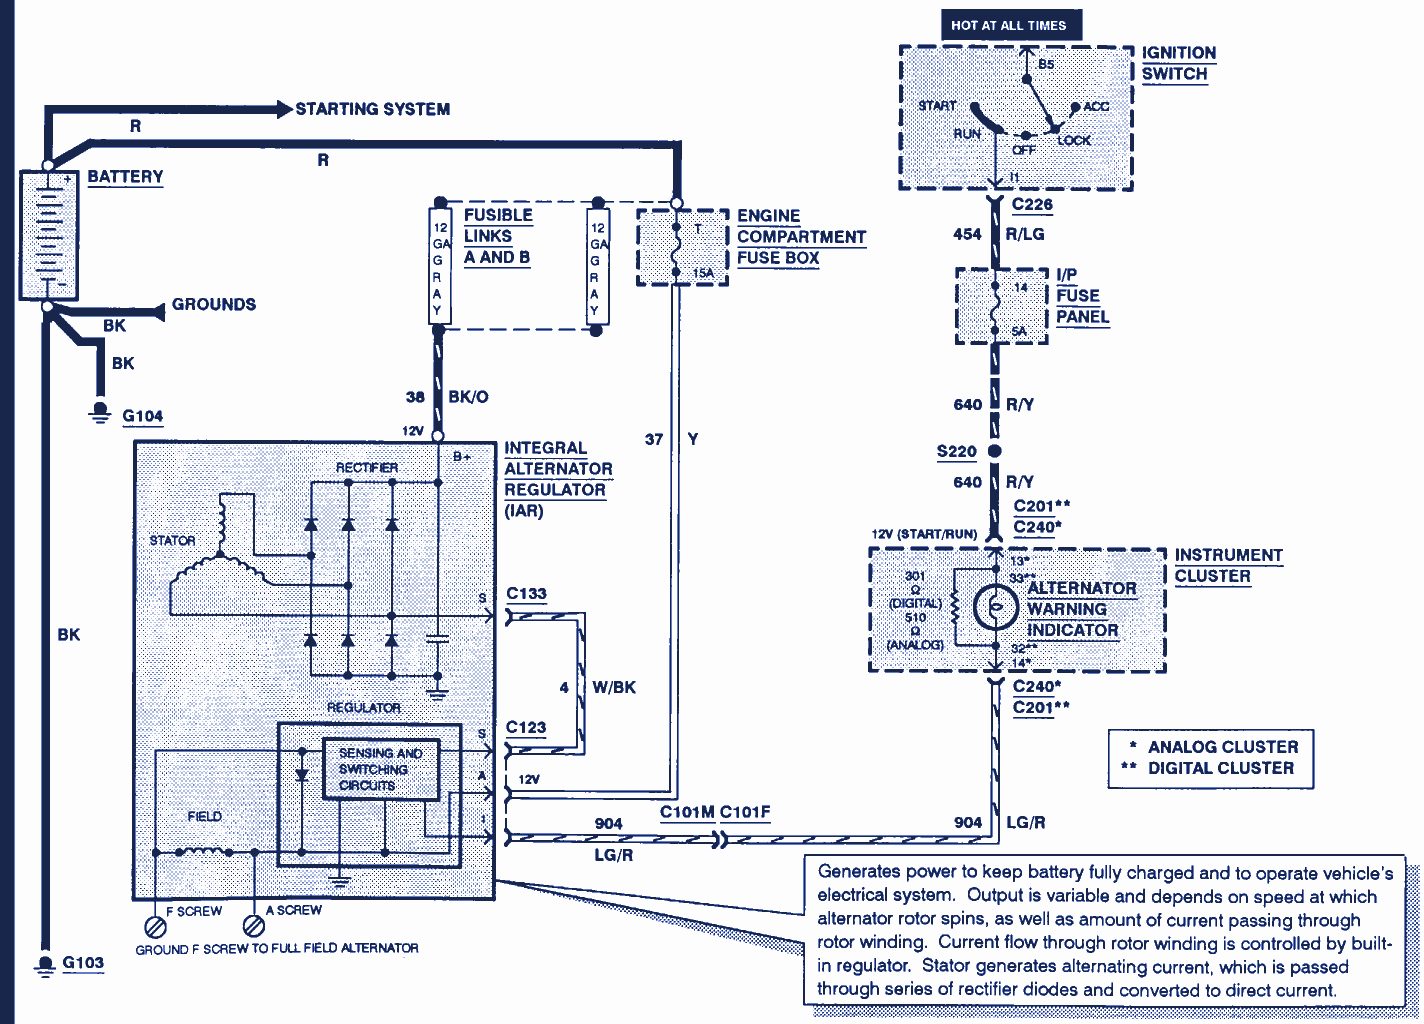 2002 Ford Expedition Radio Wiring Diagram from 3.bp.blogspot.com